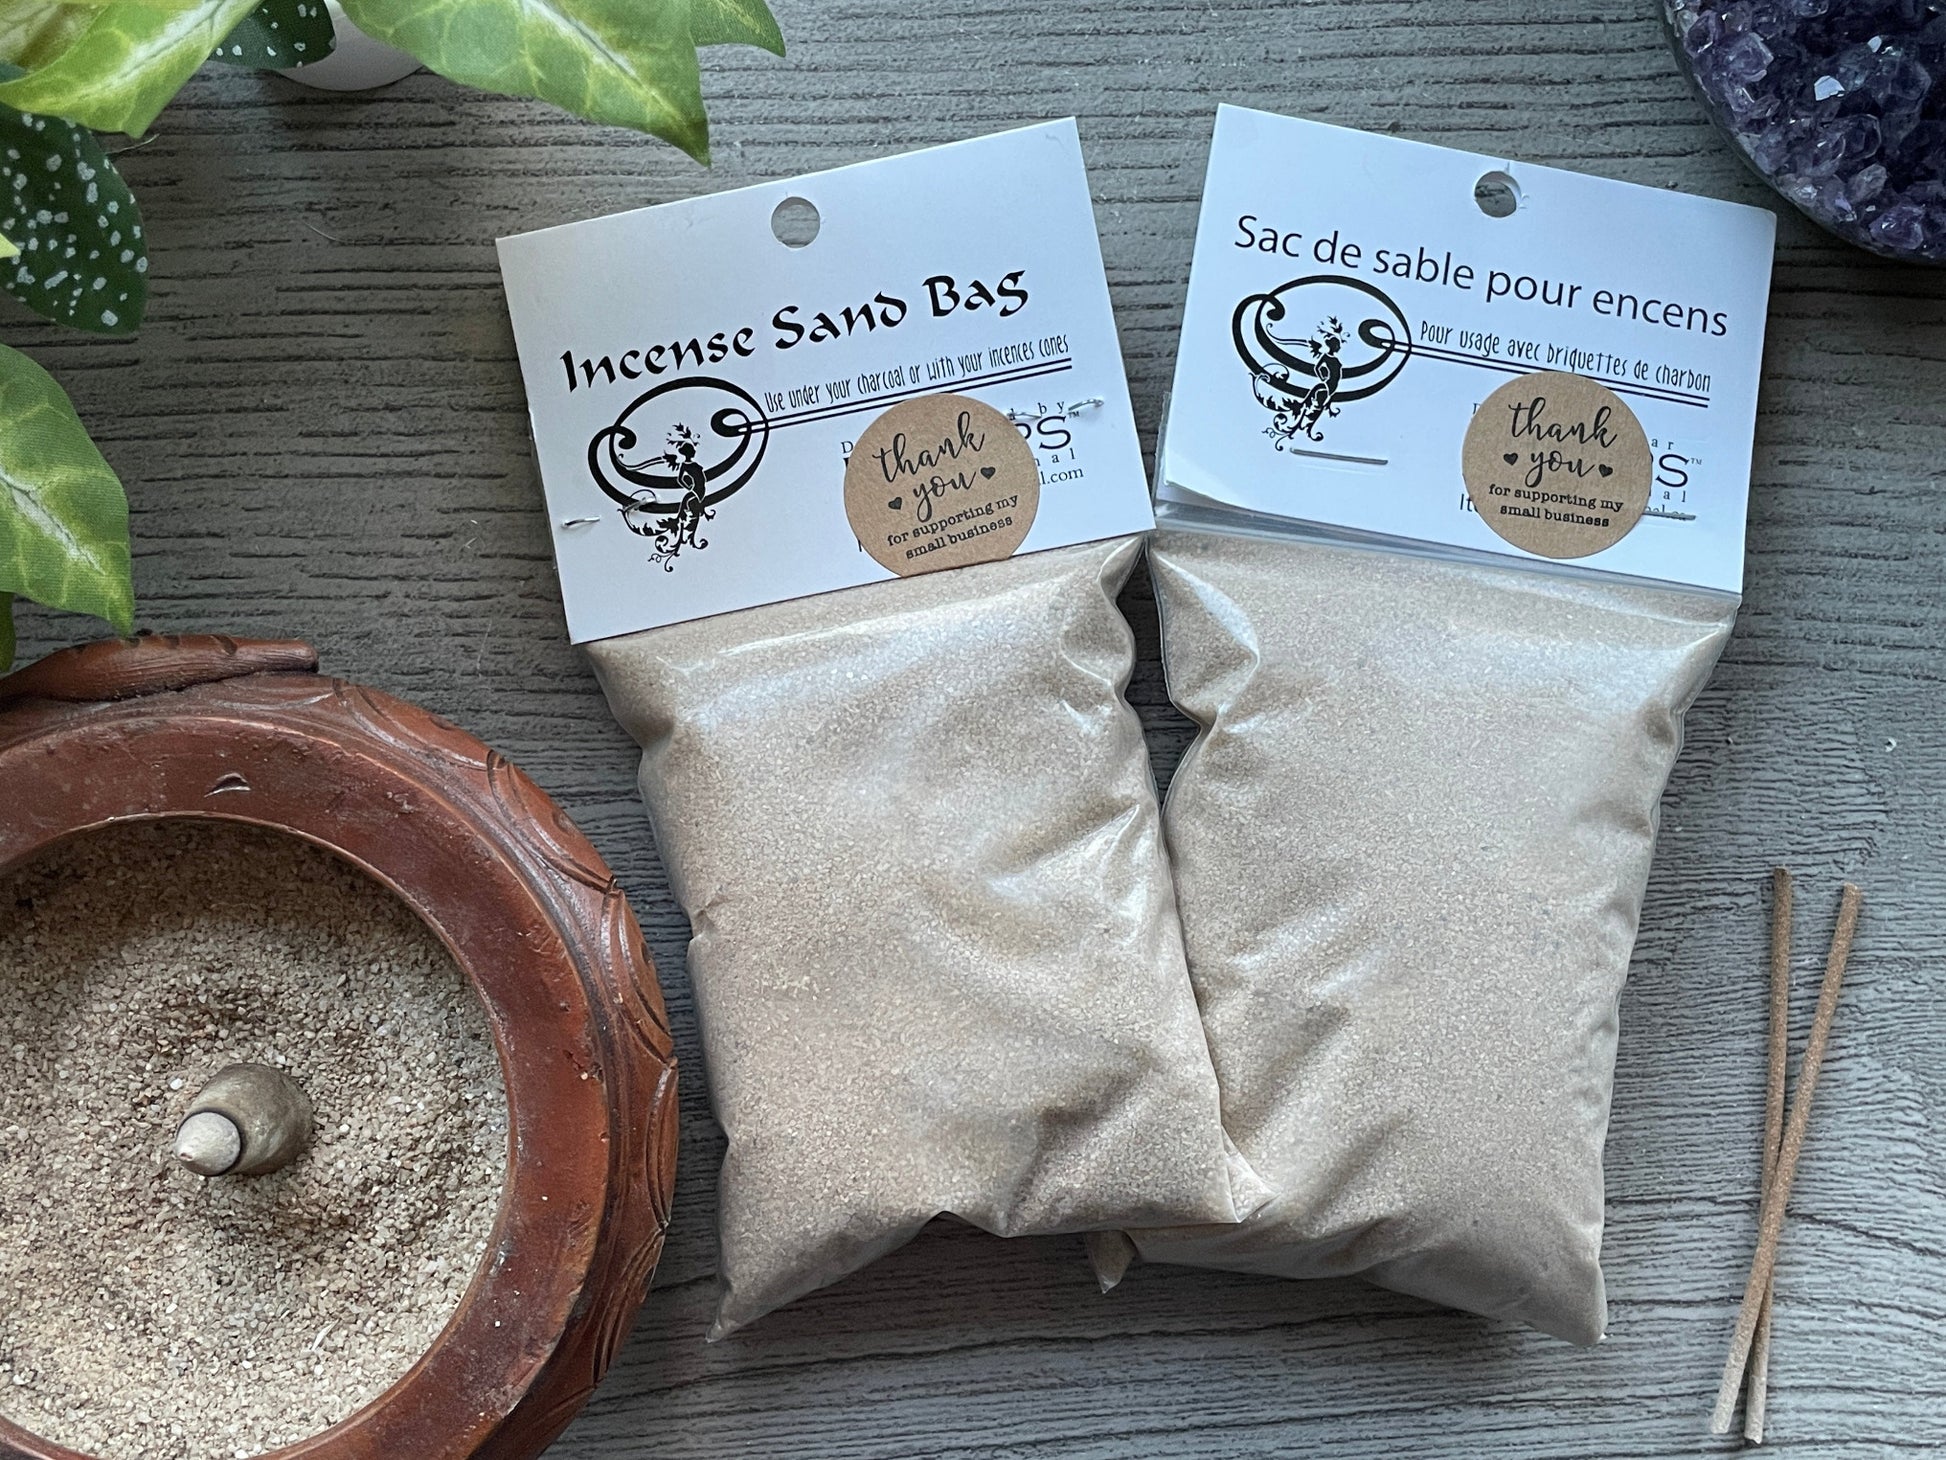 Pictured are bags of incense sand.